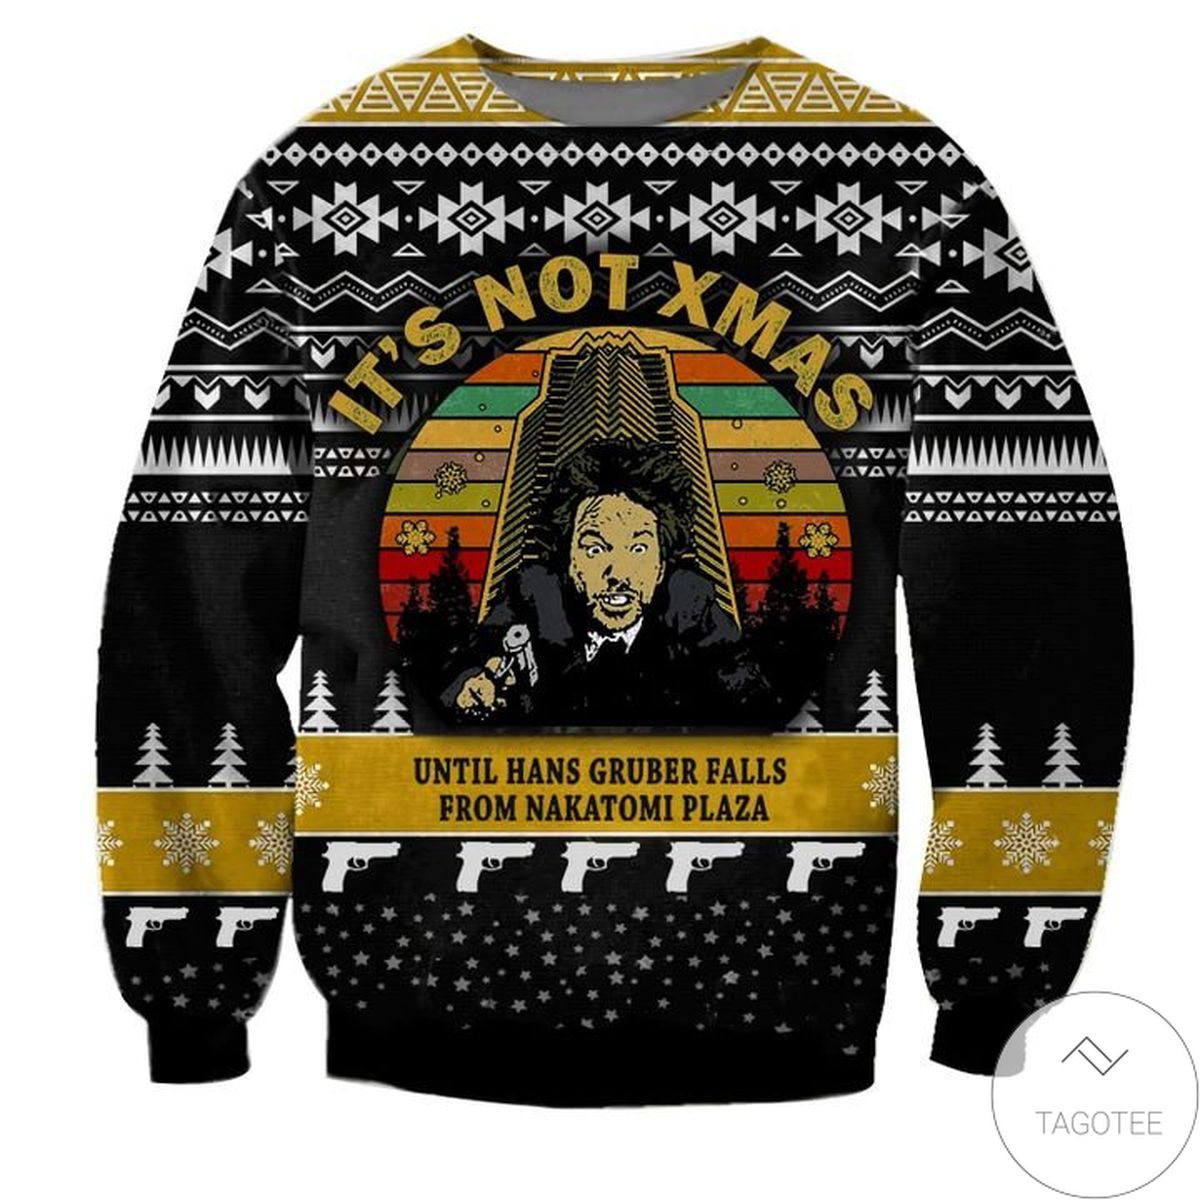 It's No Xmas Until Hans Gruber Falls From Nakatomi Plaza Ugly Christmas Sweater